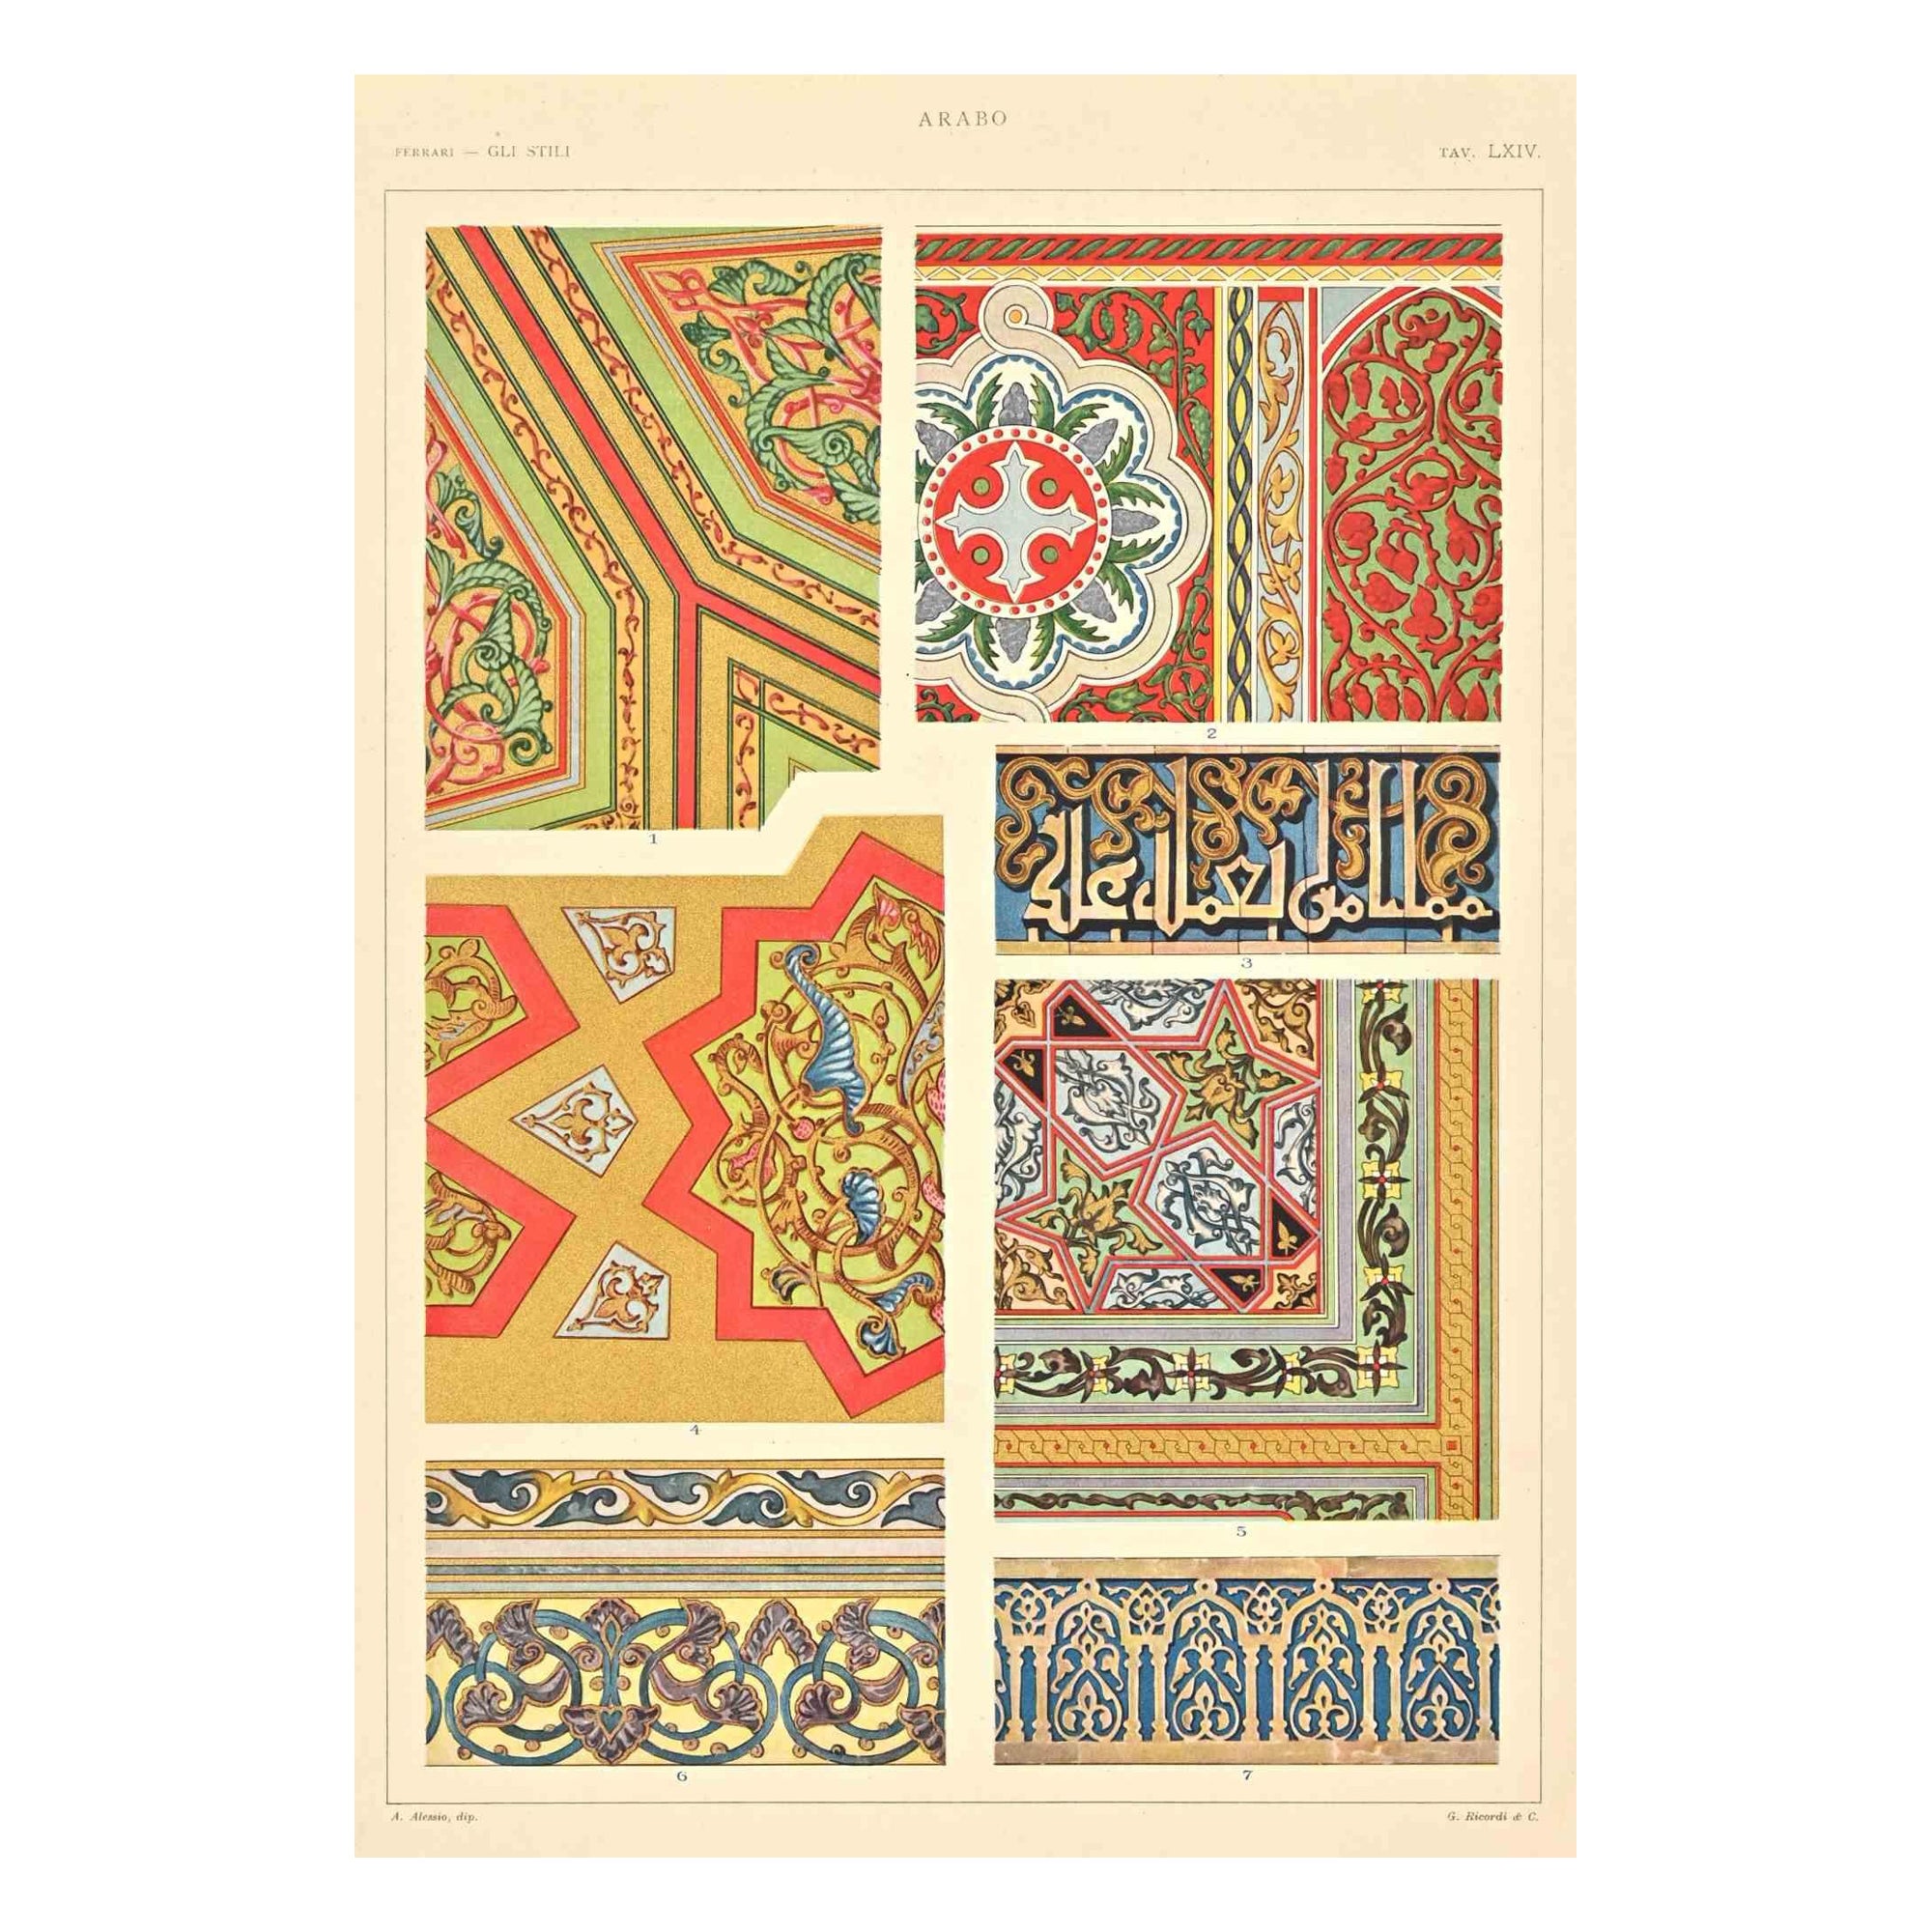 Decorative Motifs - Arabic Style is a print on Ivory-colored paper realized by an A. Alessio in the  early 20th Century

Vintage Chromolithograph.

Very good conditions.

The artwork represents Decorative motifs through well-defined details with